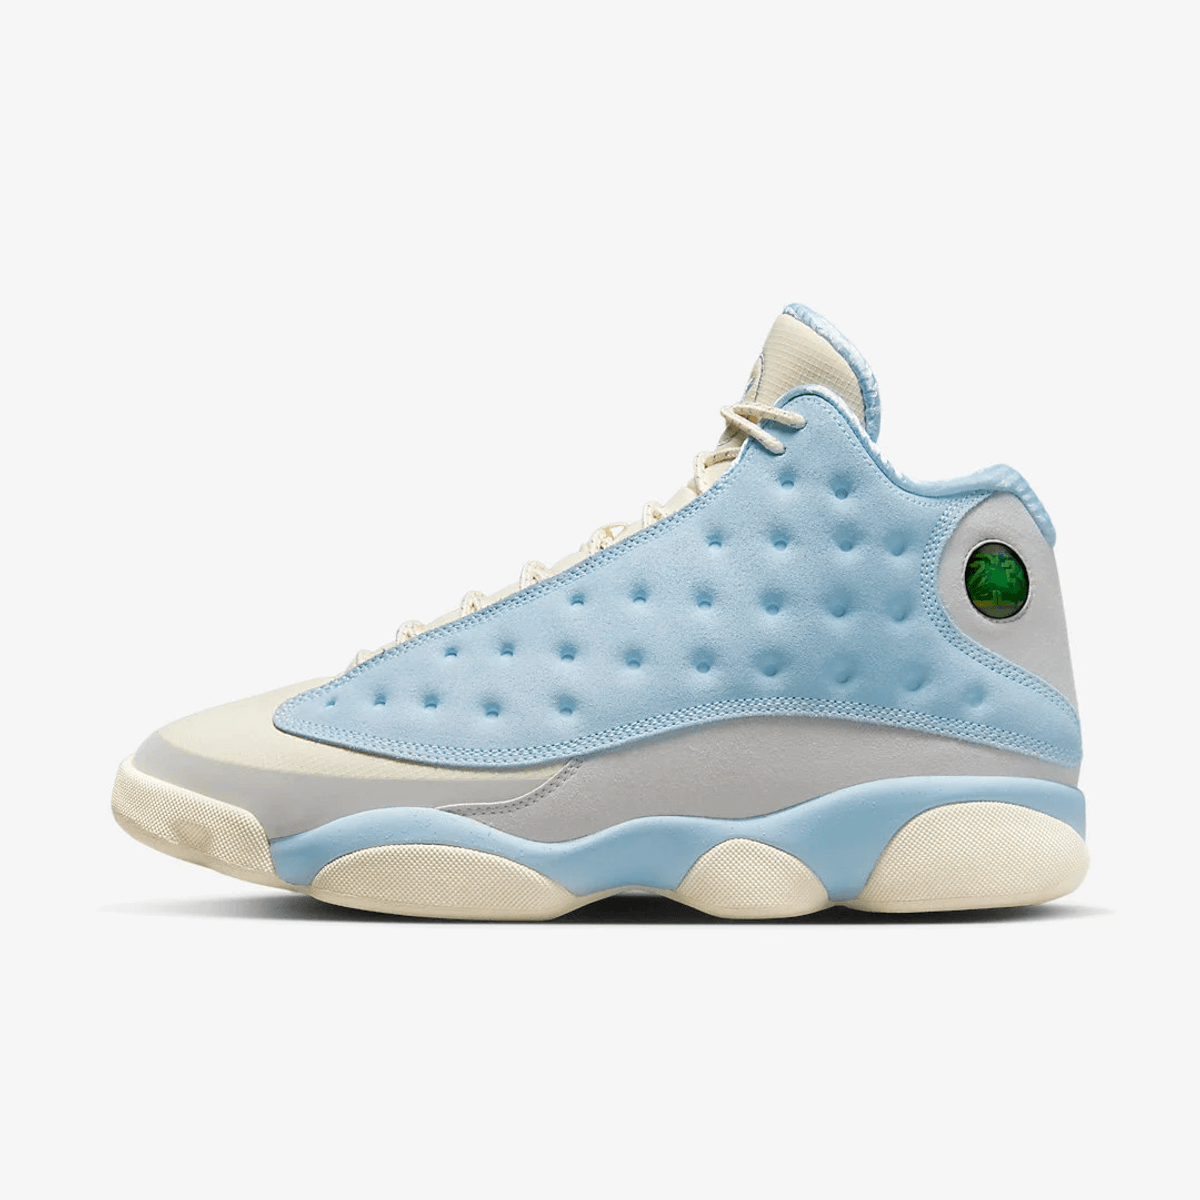 SoleFly And Jordan Brand Are Teaming Up On A Jordan 13